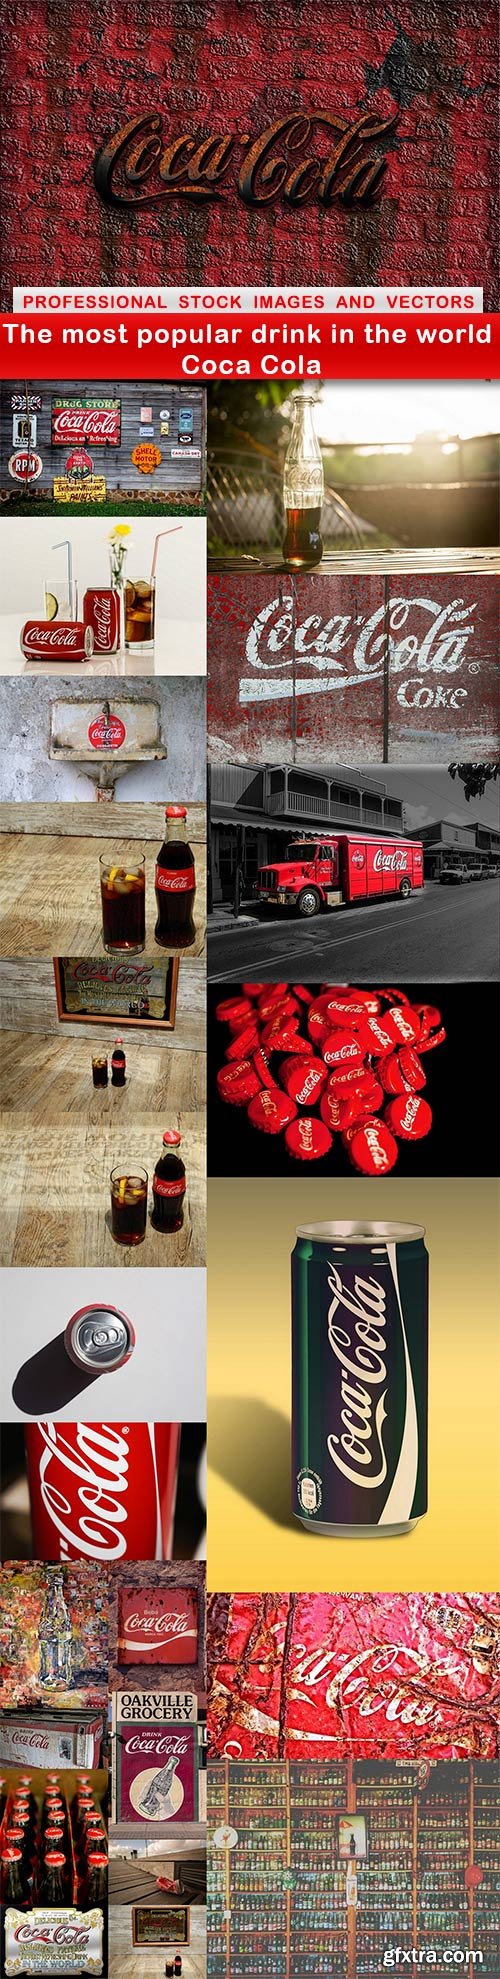 The most popular drink in the world Coca Cola - 24 UHQ JPEG